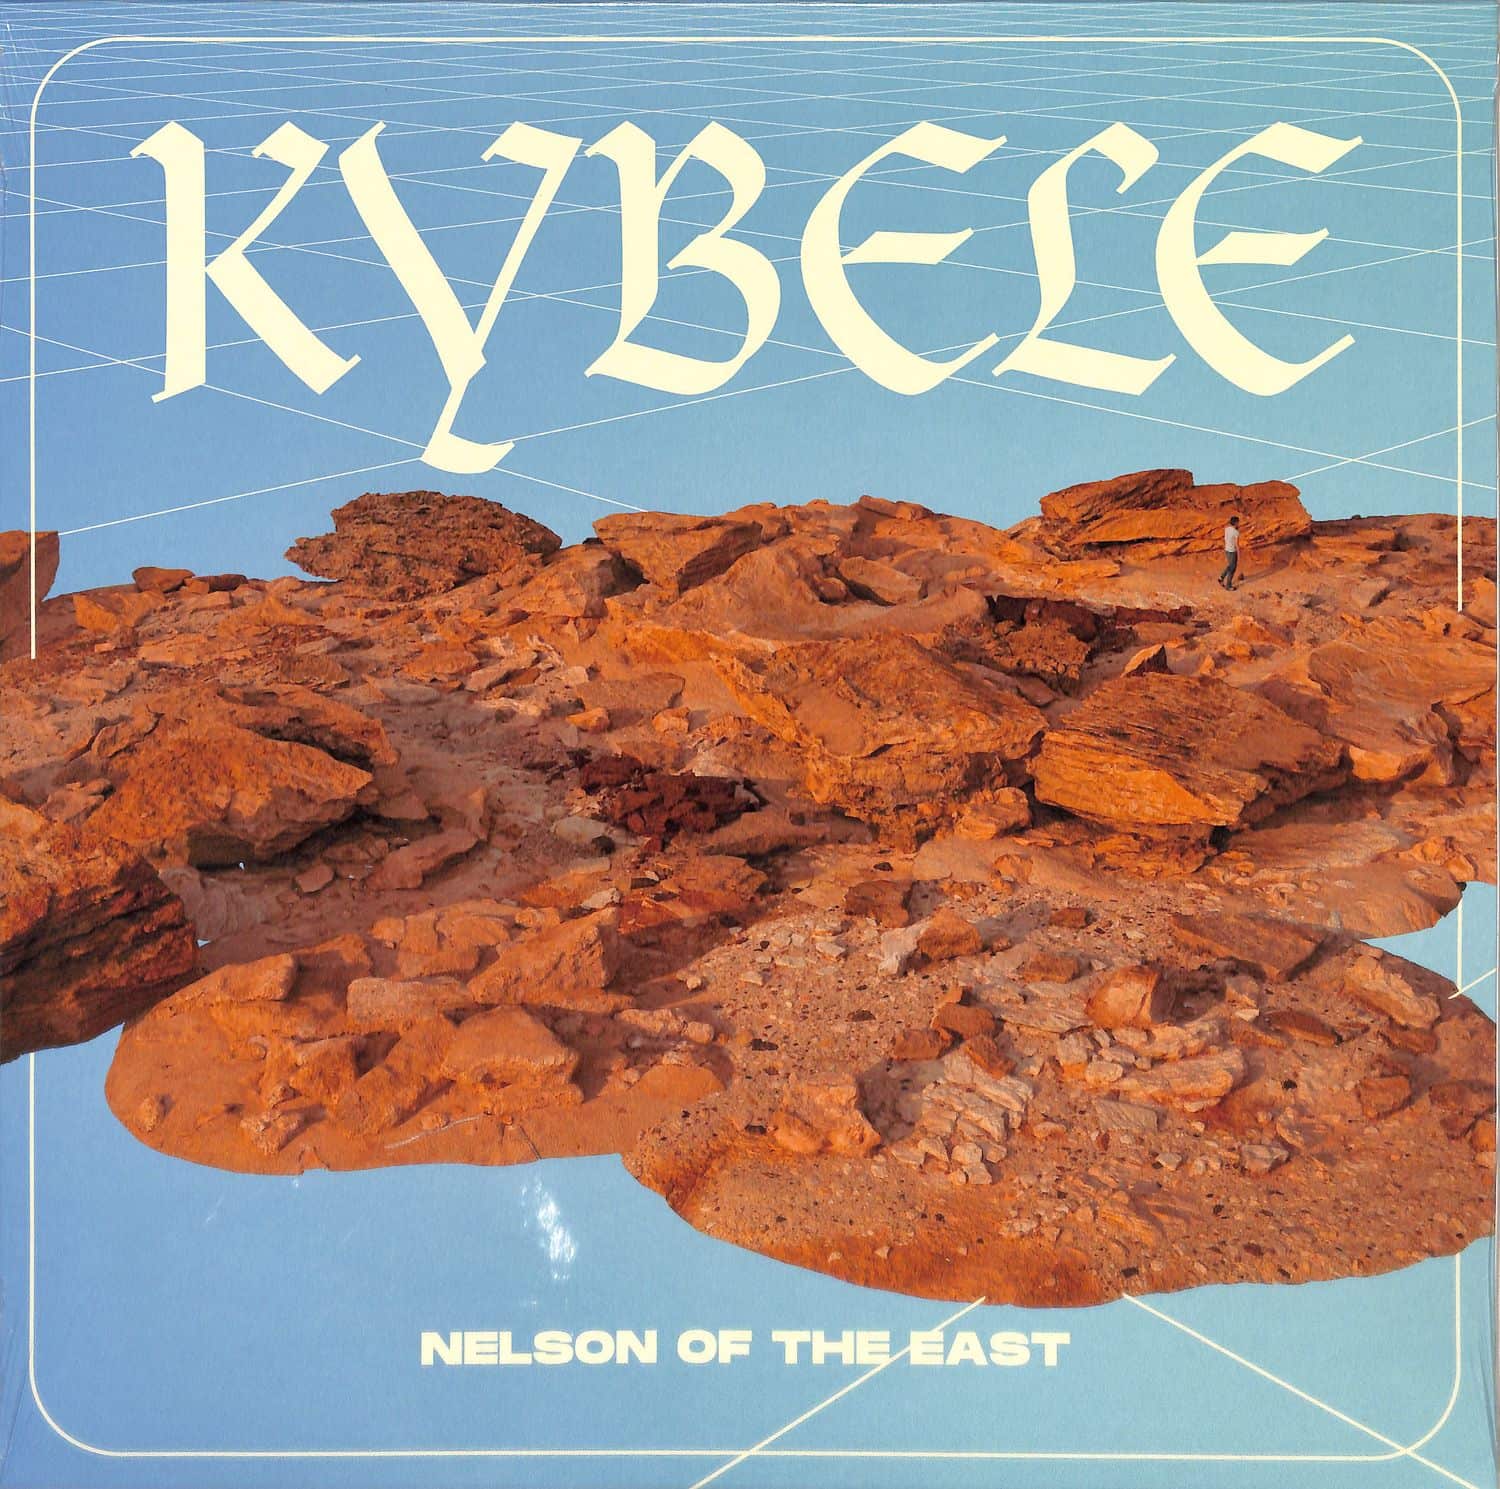 Nelson Of The East - KYBELE 